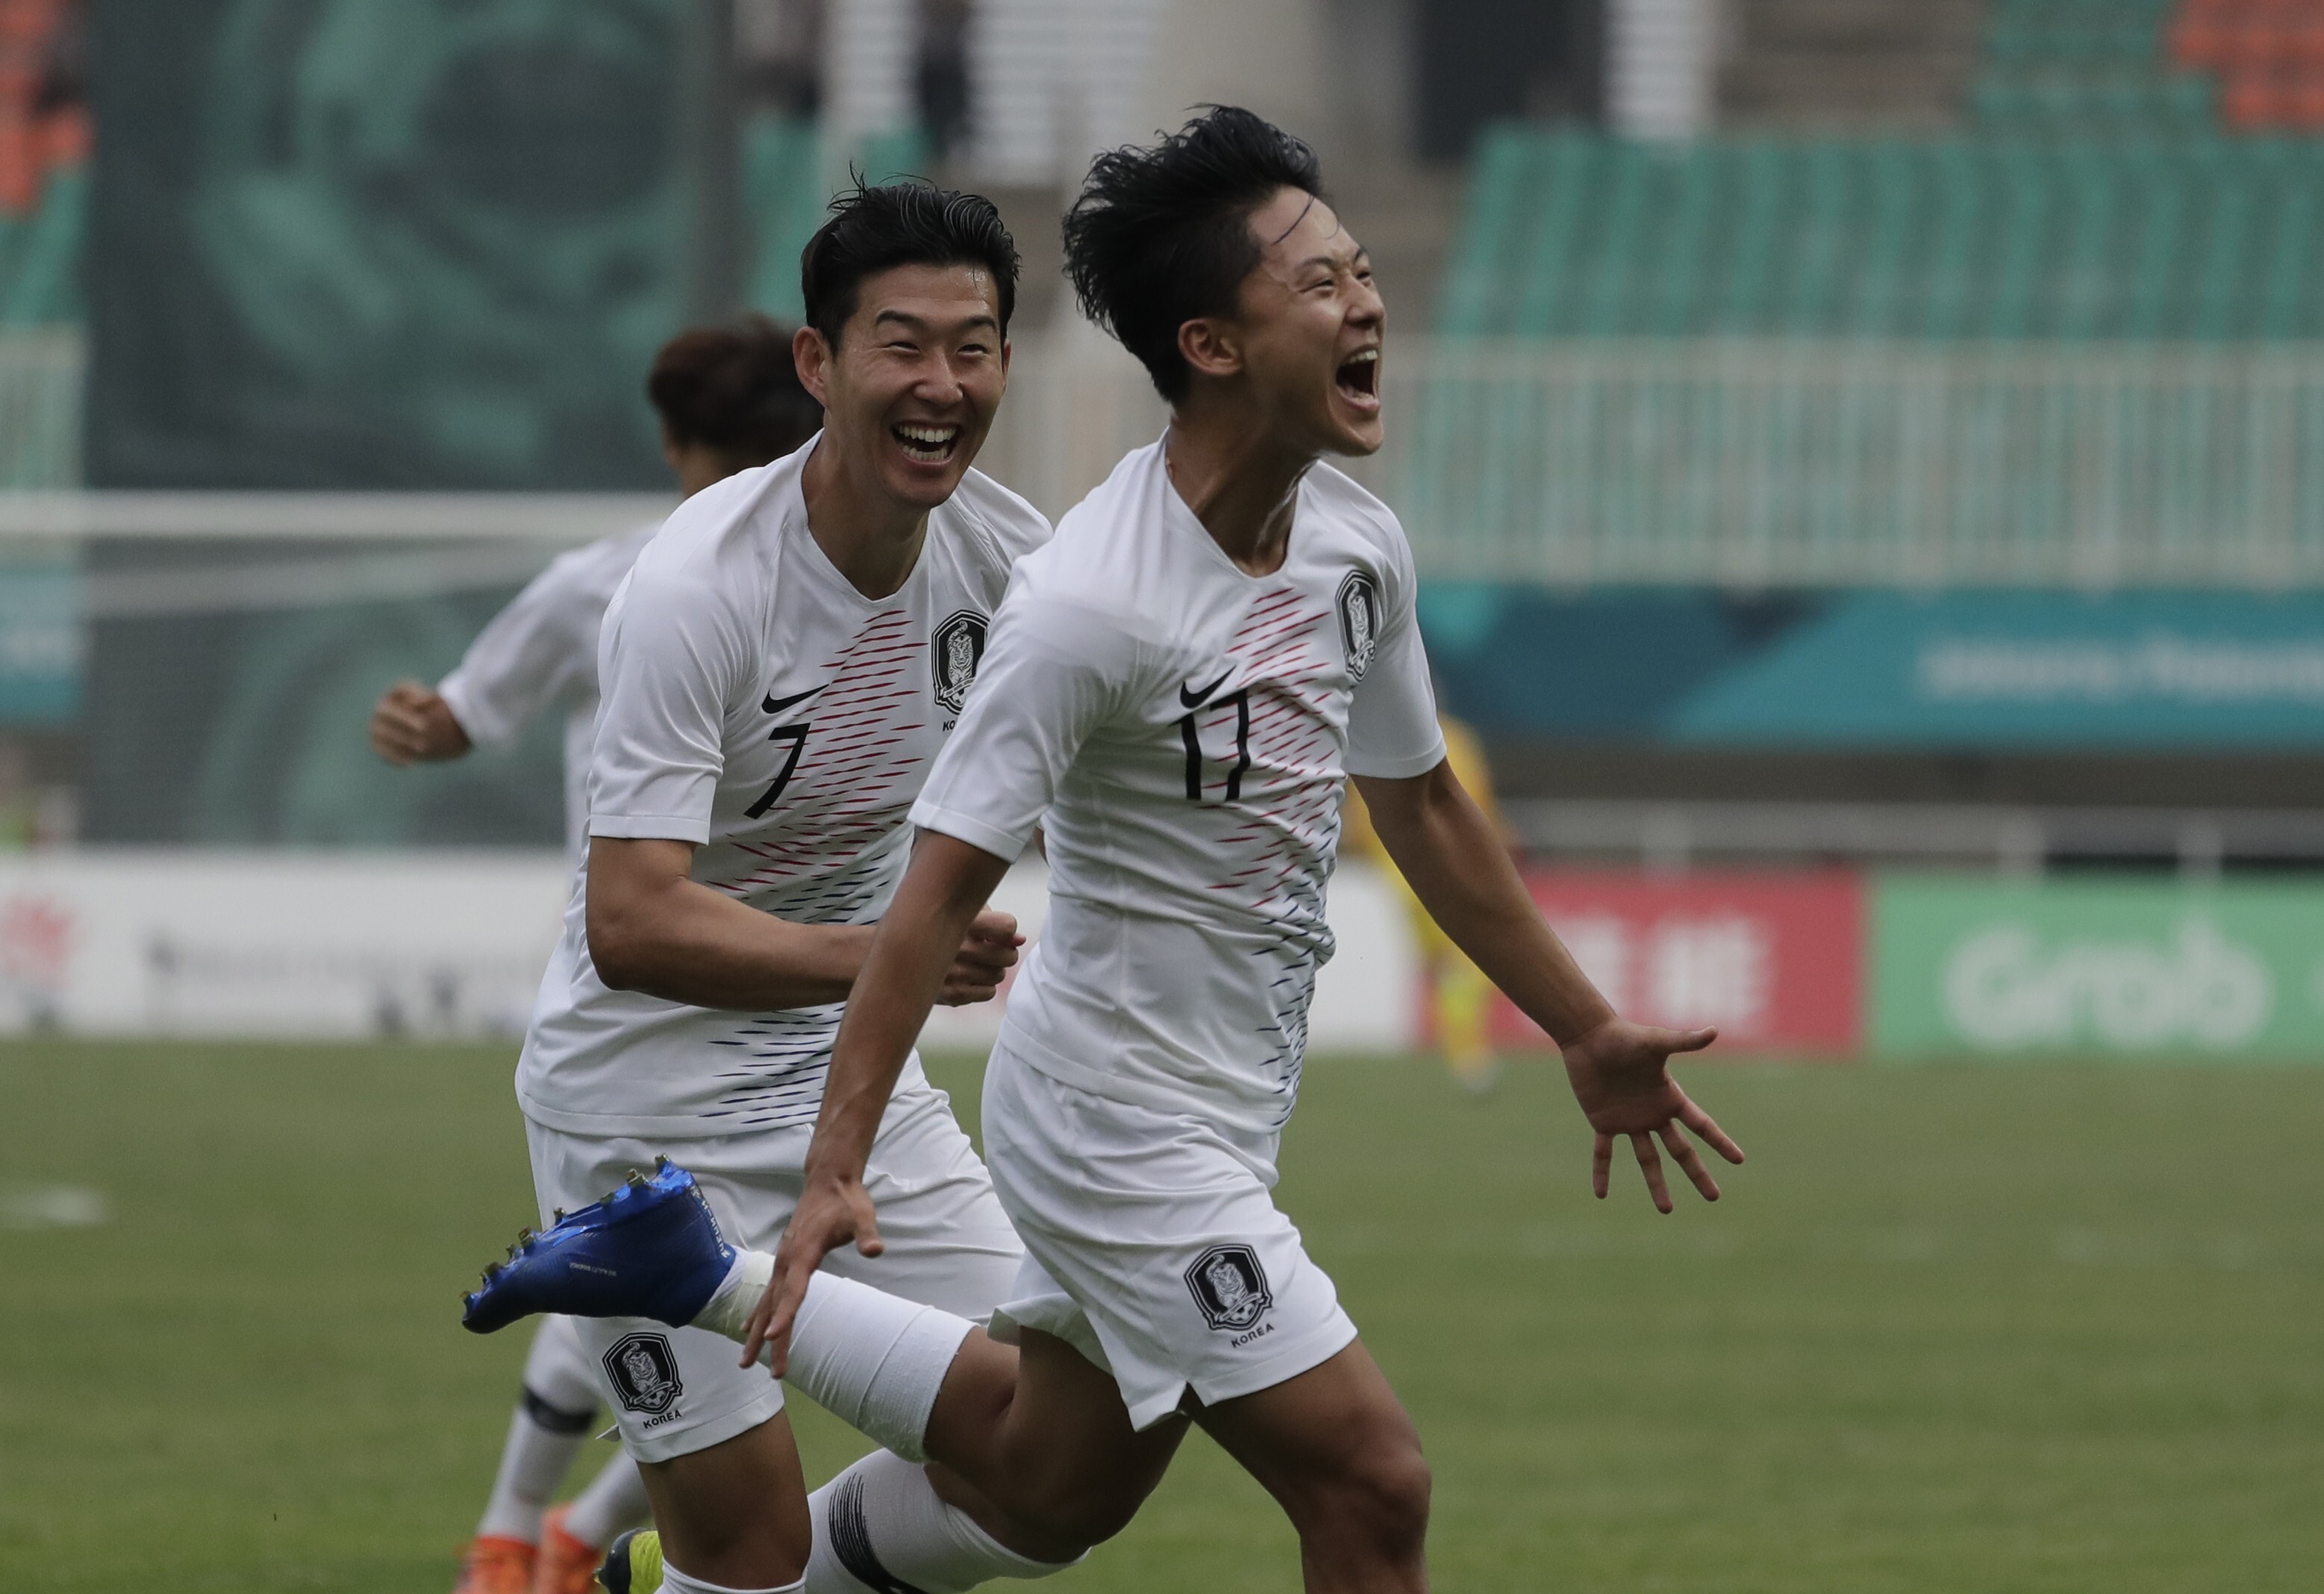 South Korean footballer Lee Seung-woo motivated by responsibility as an  Asian playing in Europe and why he lives his life with 'no regrets' | South  China Morning Post